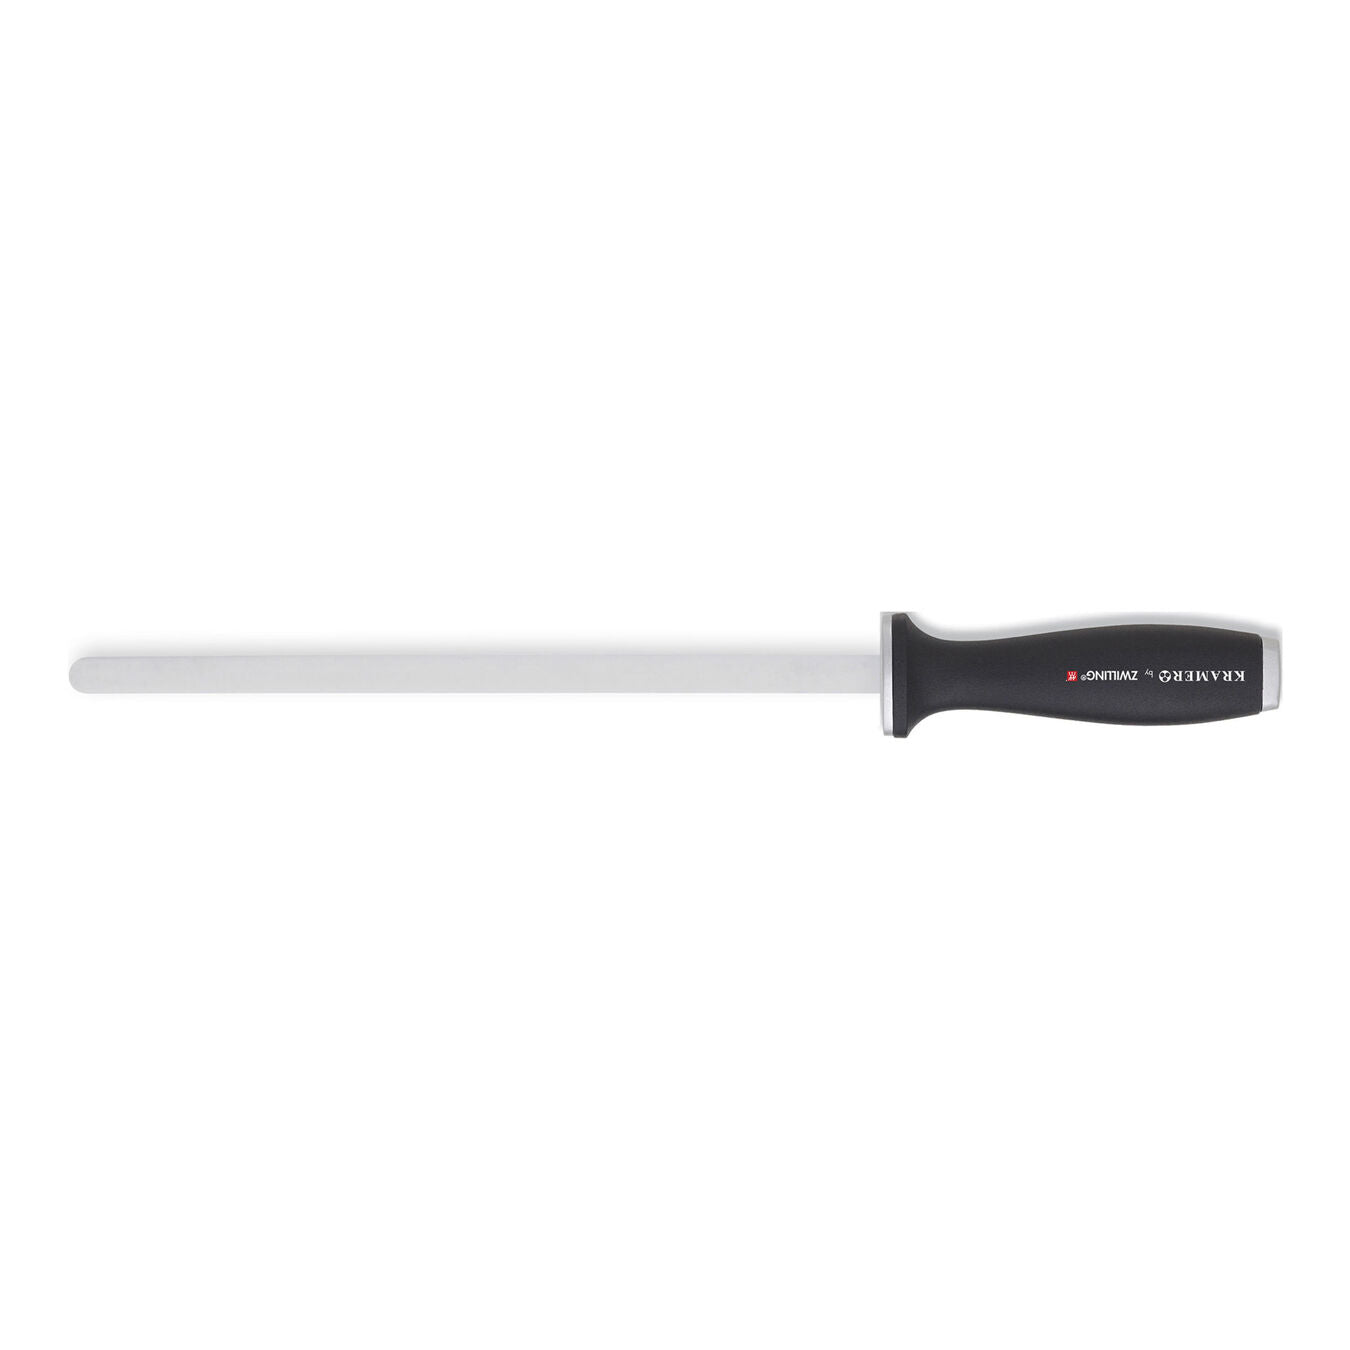 Kramer by Zwilling 12 Double Cut Honing Steel with Plastic Handle